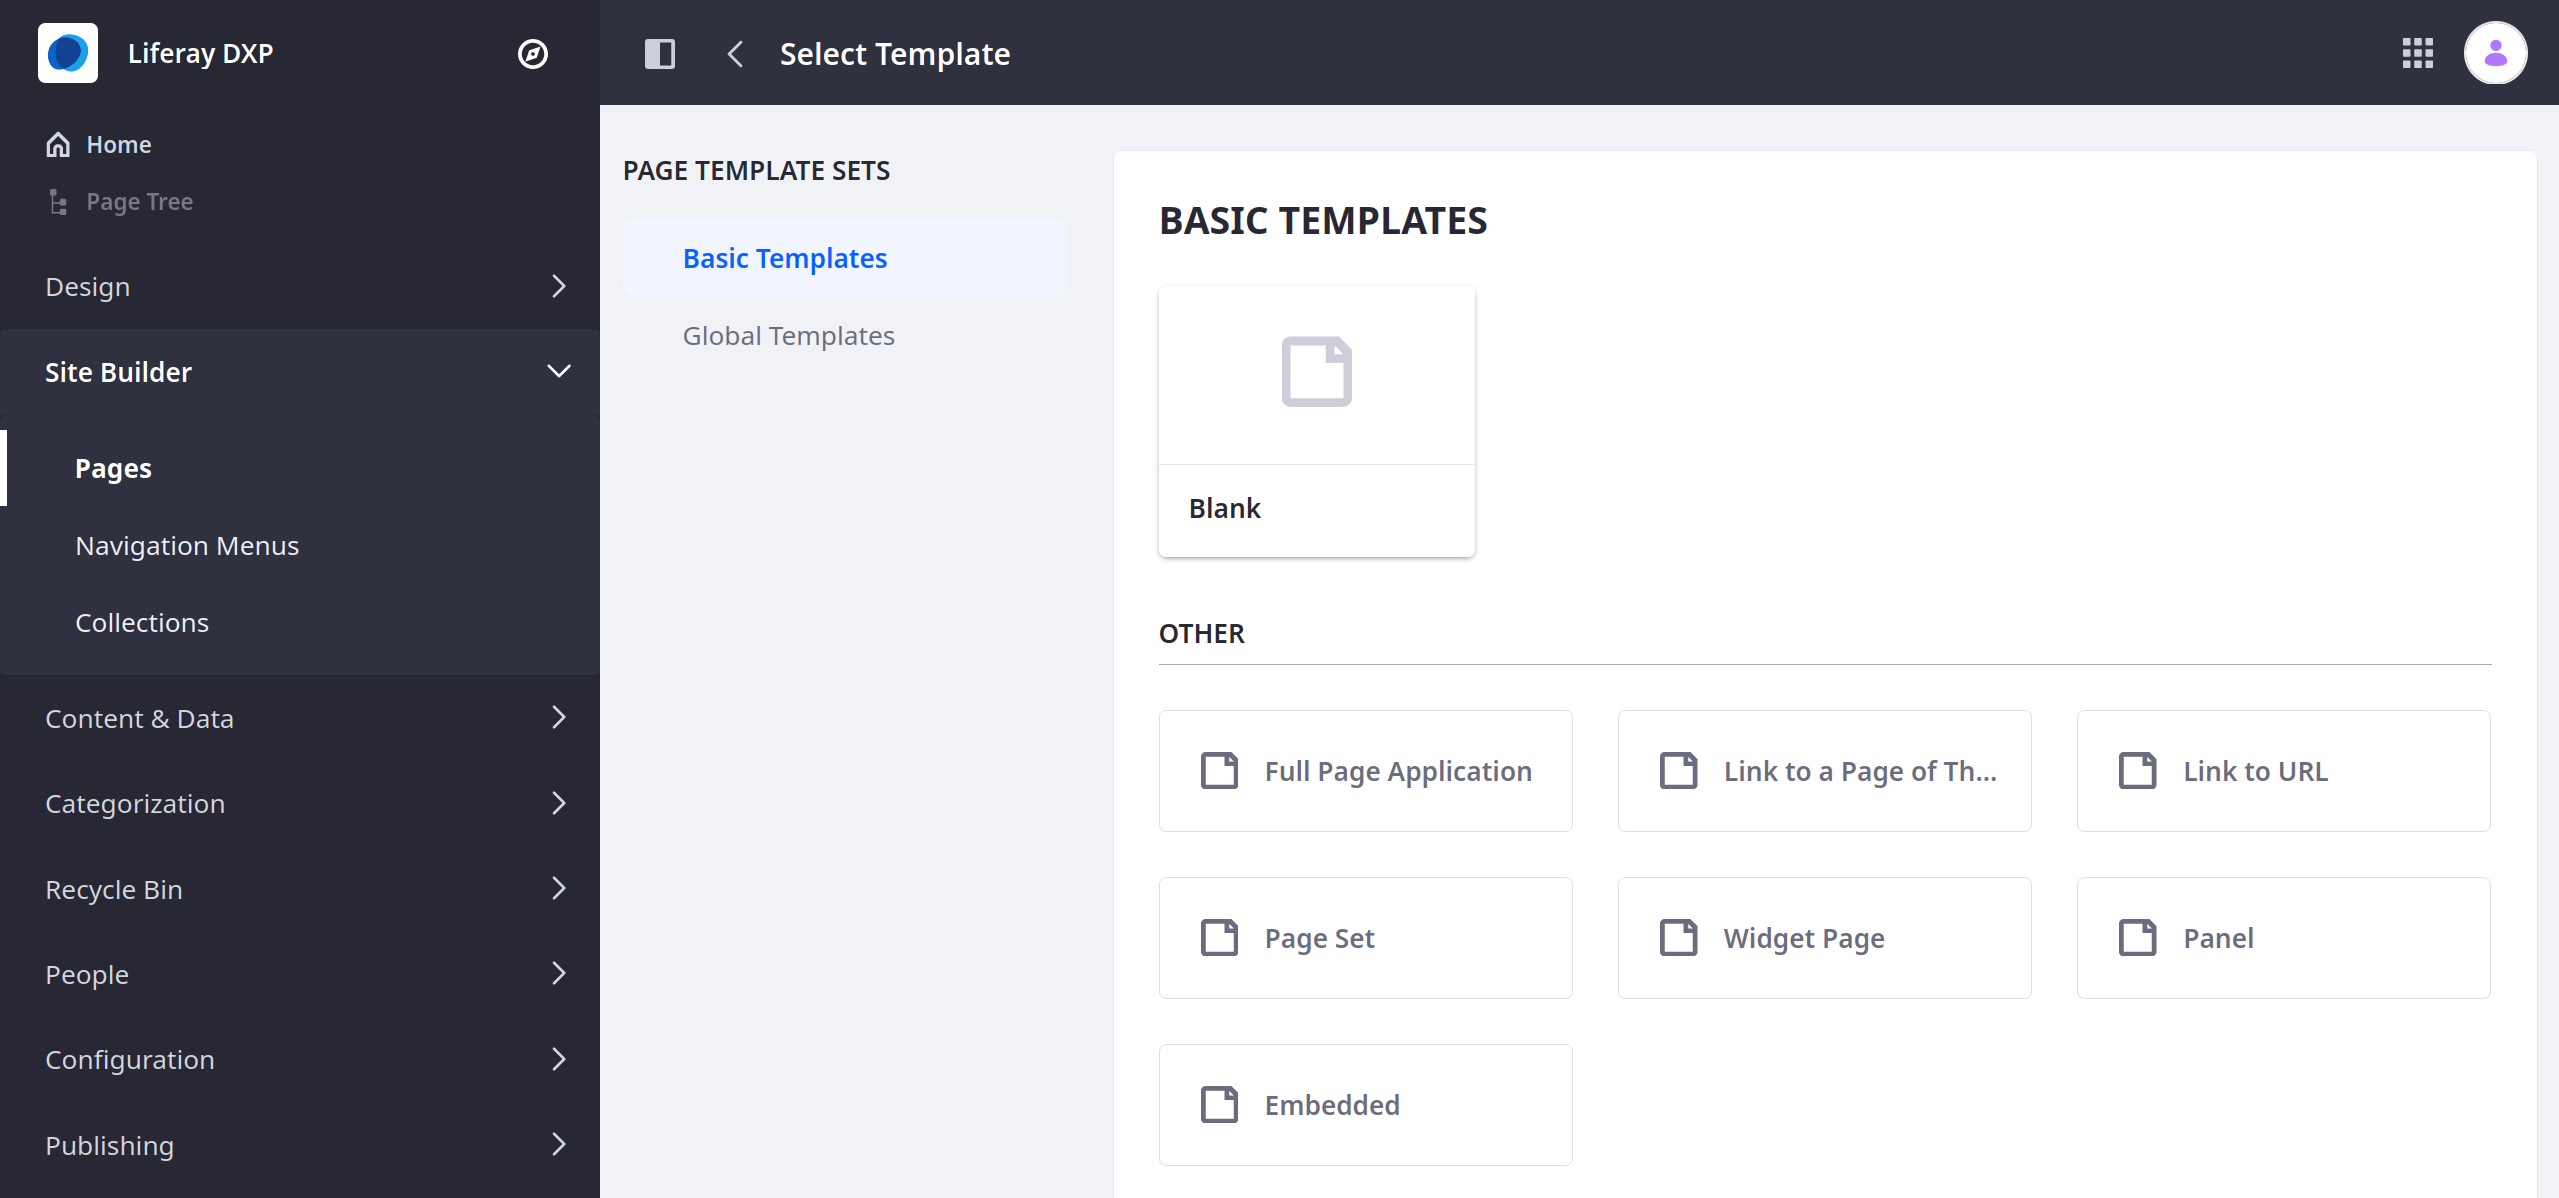 Basic page templates are available.